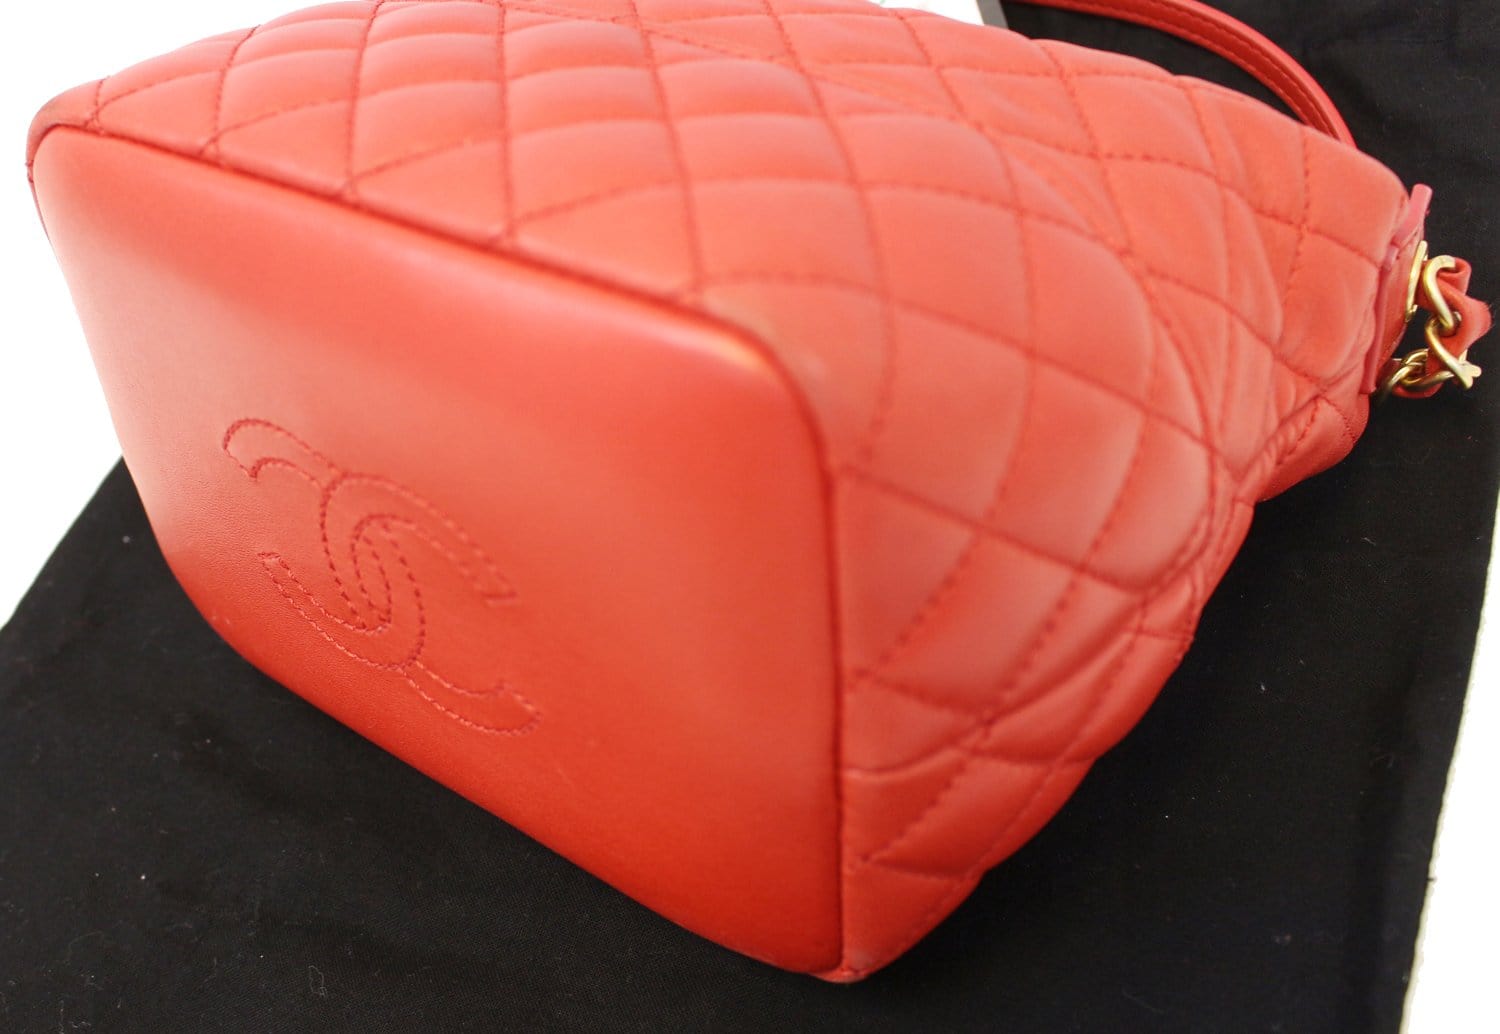 Buy CHANEL CHANEL'S GABRIELLE Small Hobo Bag at Redfynd